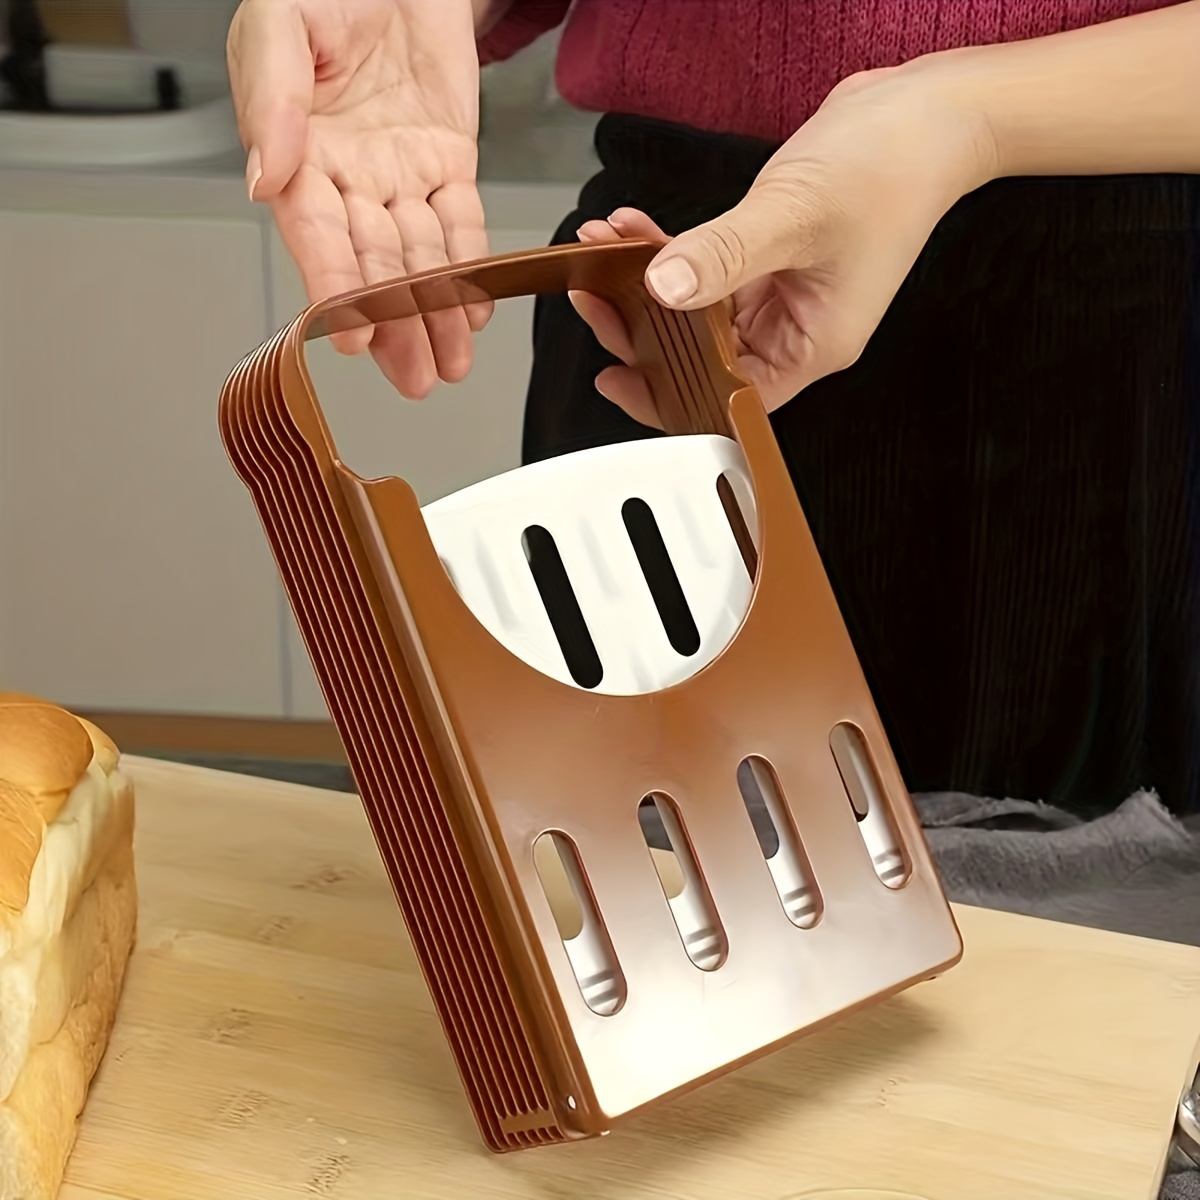 1pc New Toast Bread Slicer Plastic Foldable Loaf Cut Rack Cutting Guide Slicing Tool Kitchen Accessories Practical Cakes Split Tools